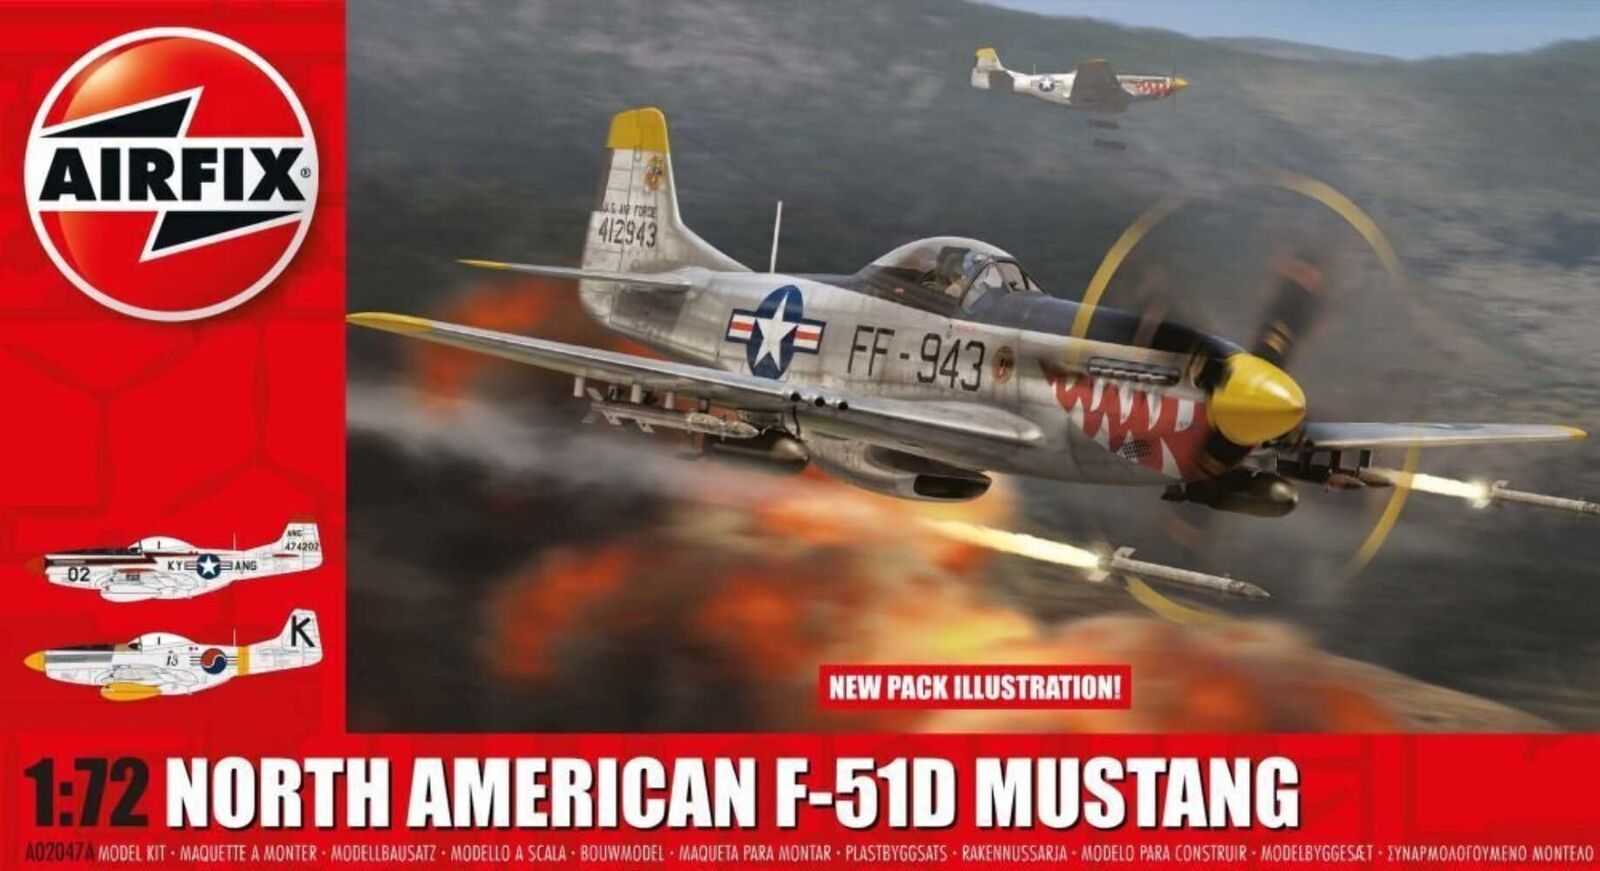 Airfix 1/72 Us Army Air Force North American F-51D Mustang Plastic A02047A